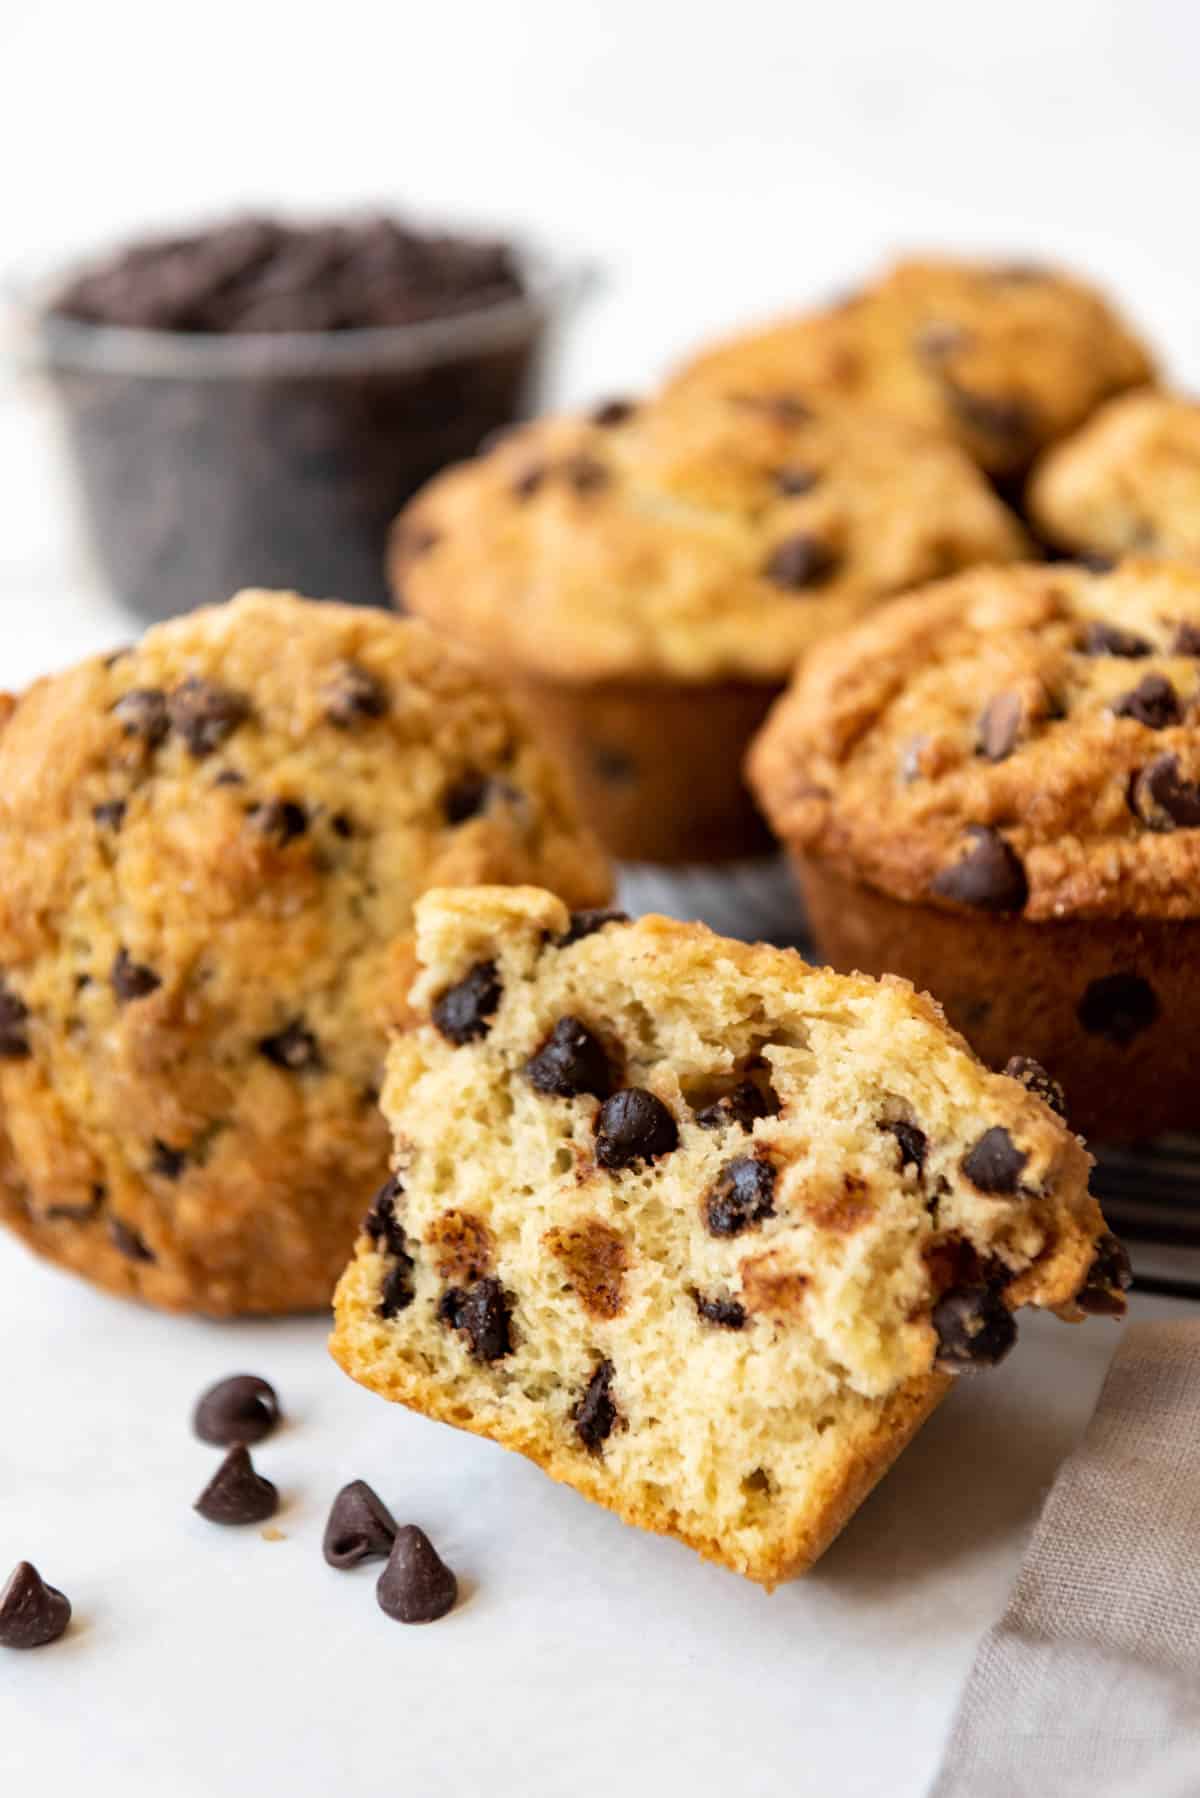 Half of a chocolate chip muffin in front of more muffins and a bowl of chocolate chips.